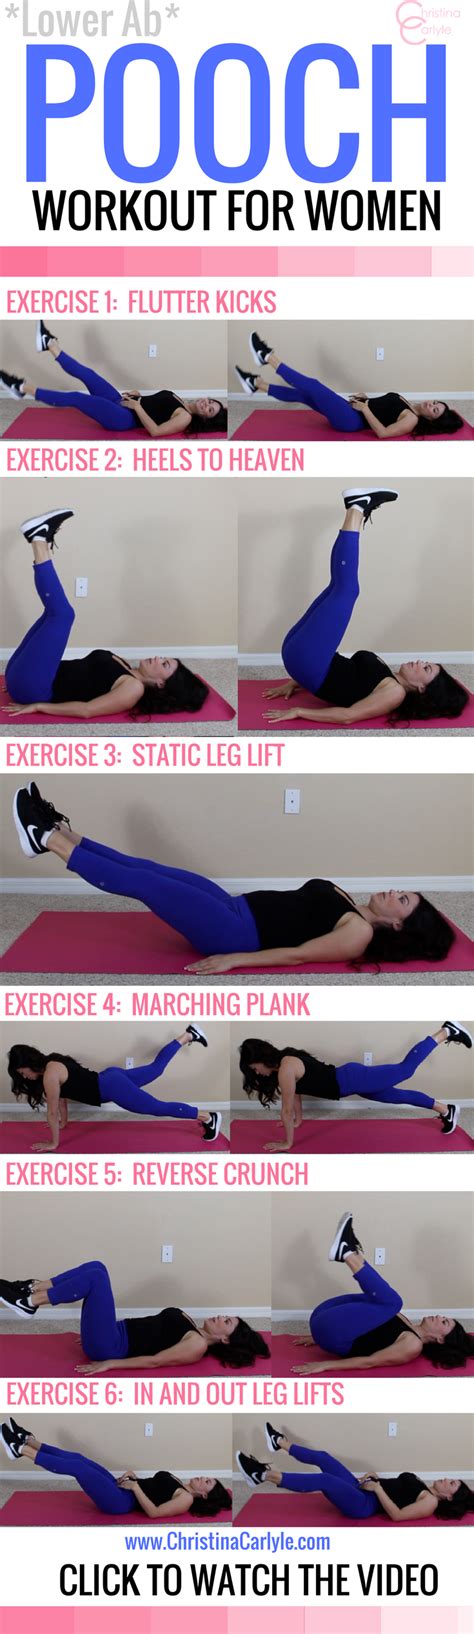 The Best Lower Ab Exercises For Women Christina Carlyle